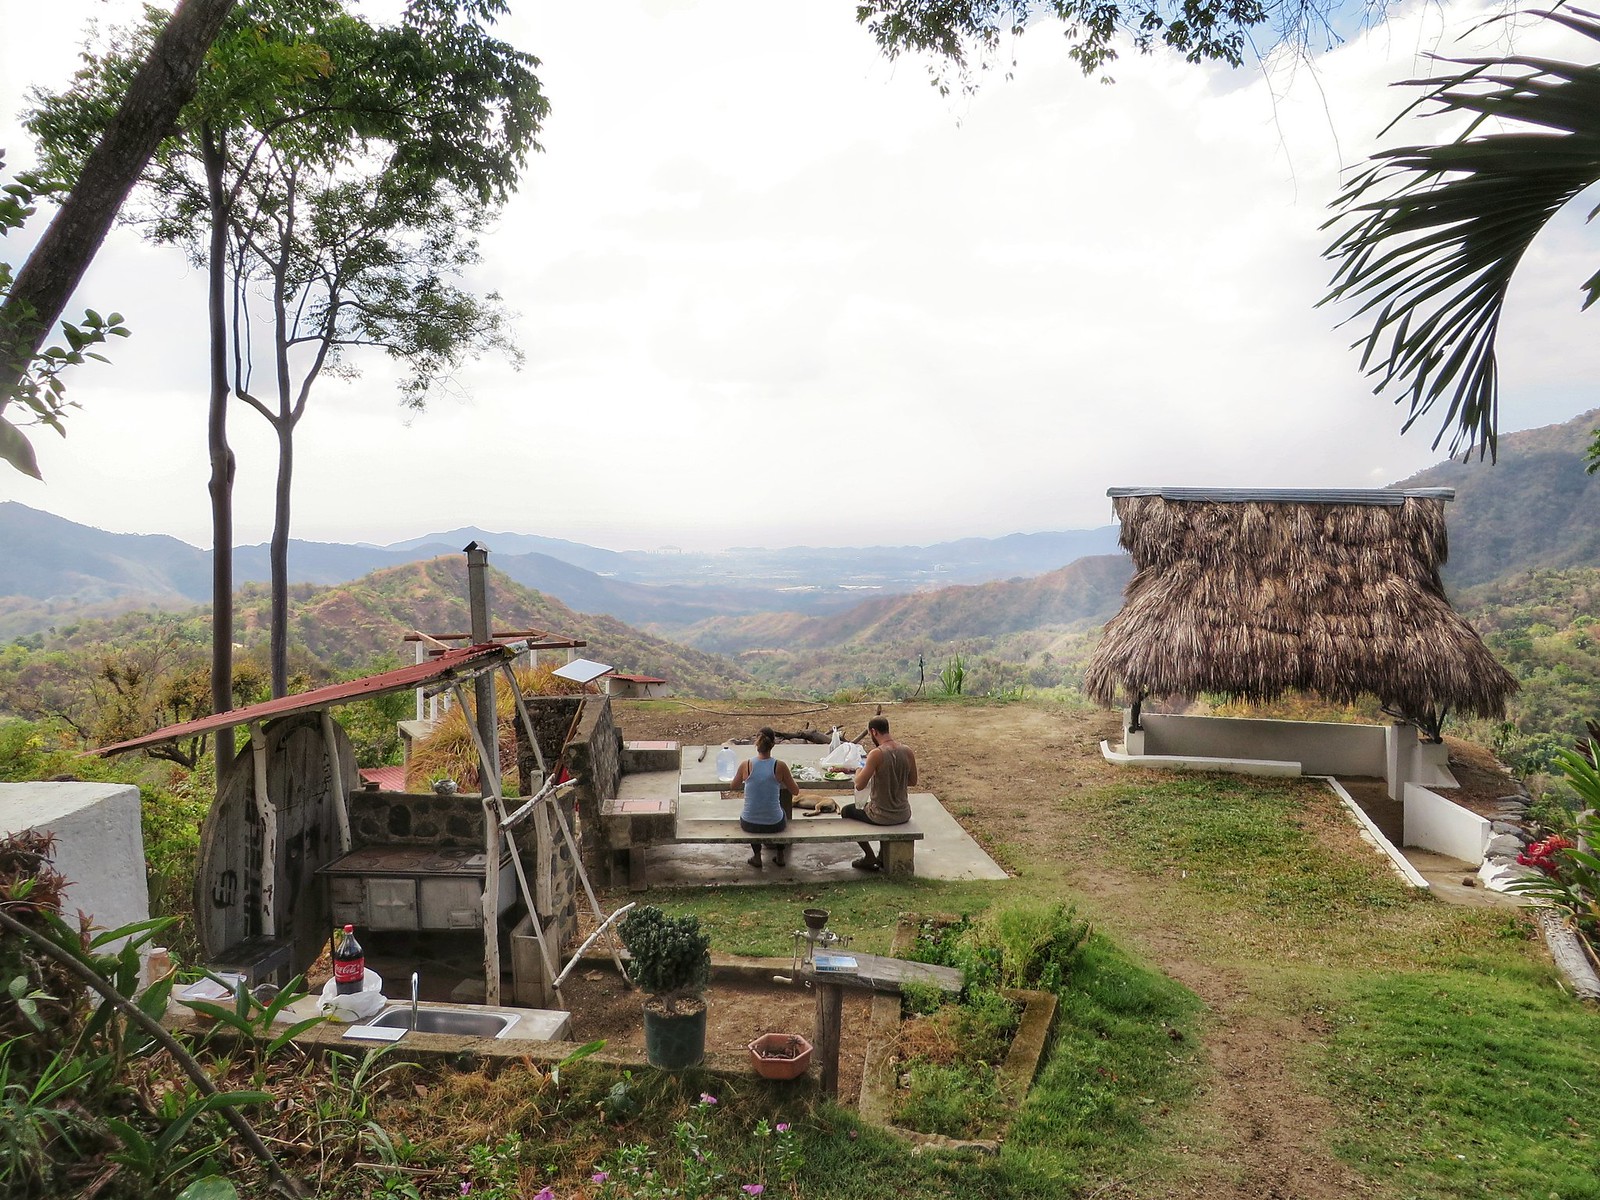 Outdoor dining at a hostel in Minca, Colombia